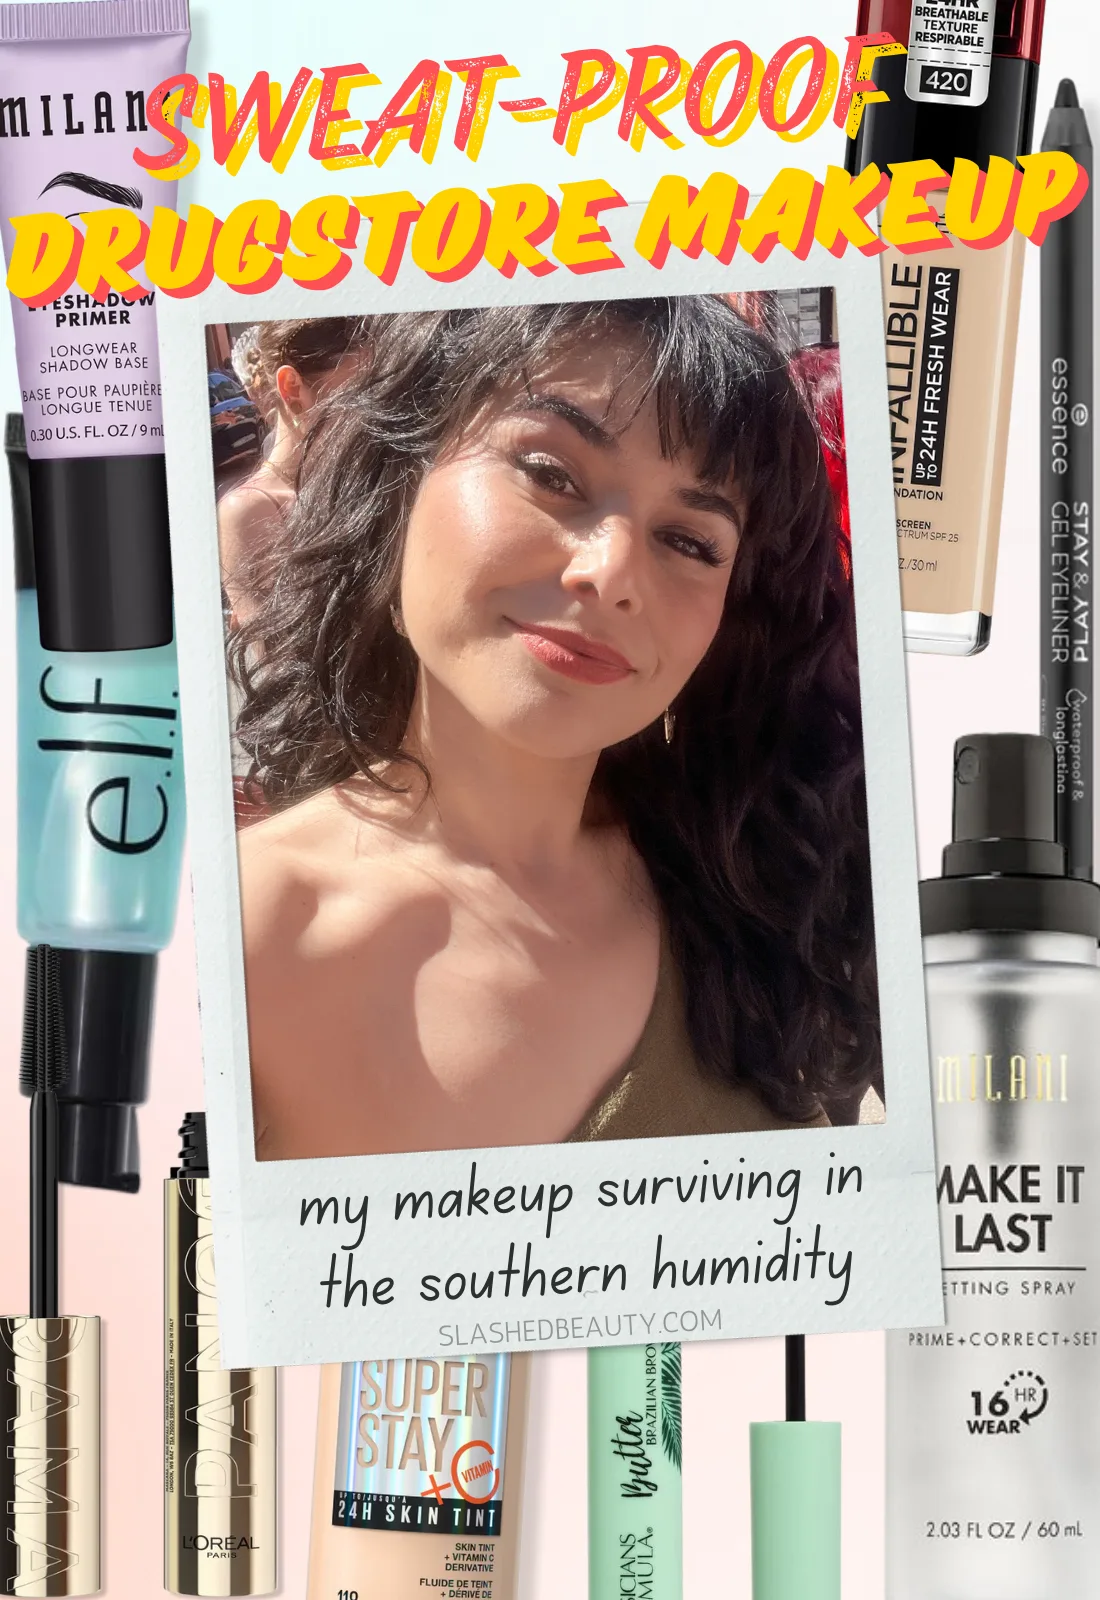 Product collage and polaroid of Miranda smiling to camera with sun shining on her face with text written: "my makeup surviving in the southern humidity." | Sweat-Proof Drugstore Makeup | Slashed Beauty